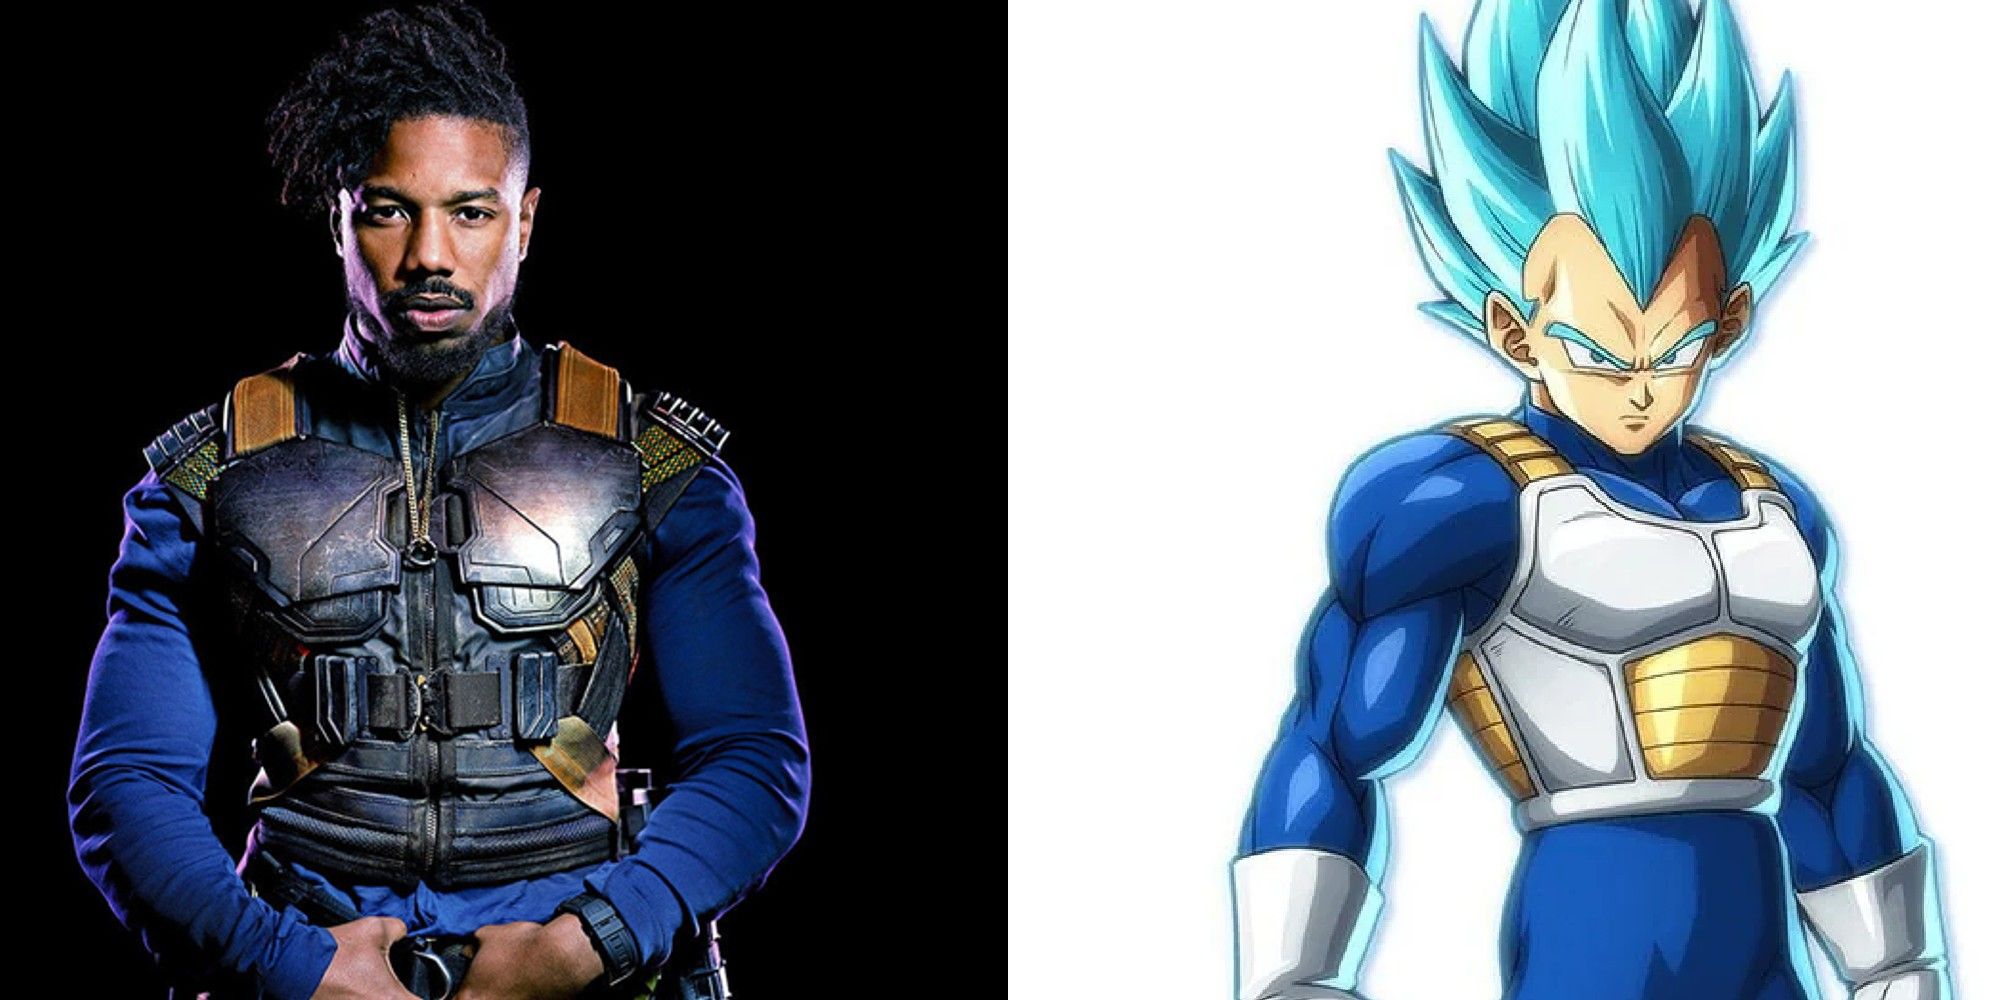 Comparison of outfits from Killmonger and Vegeta